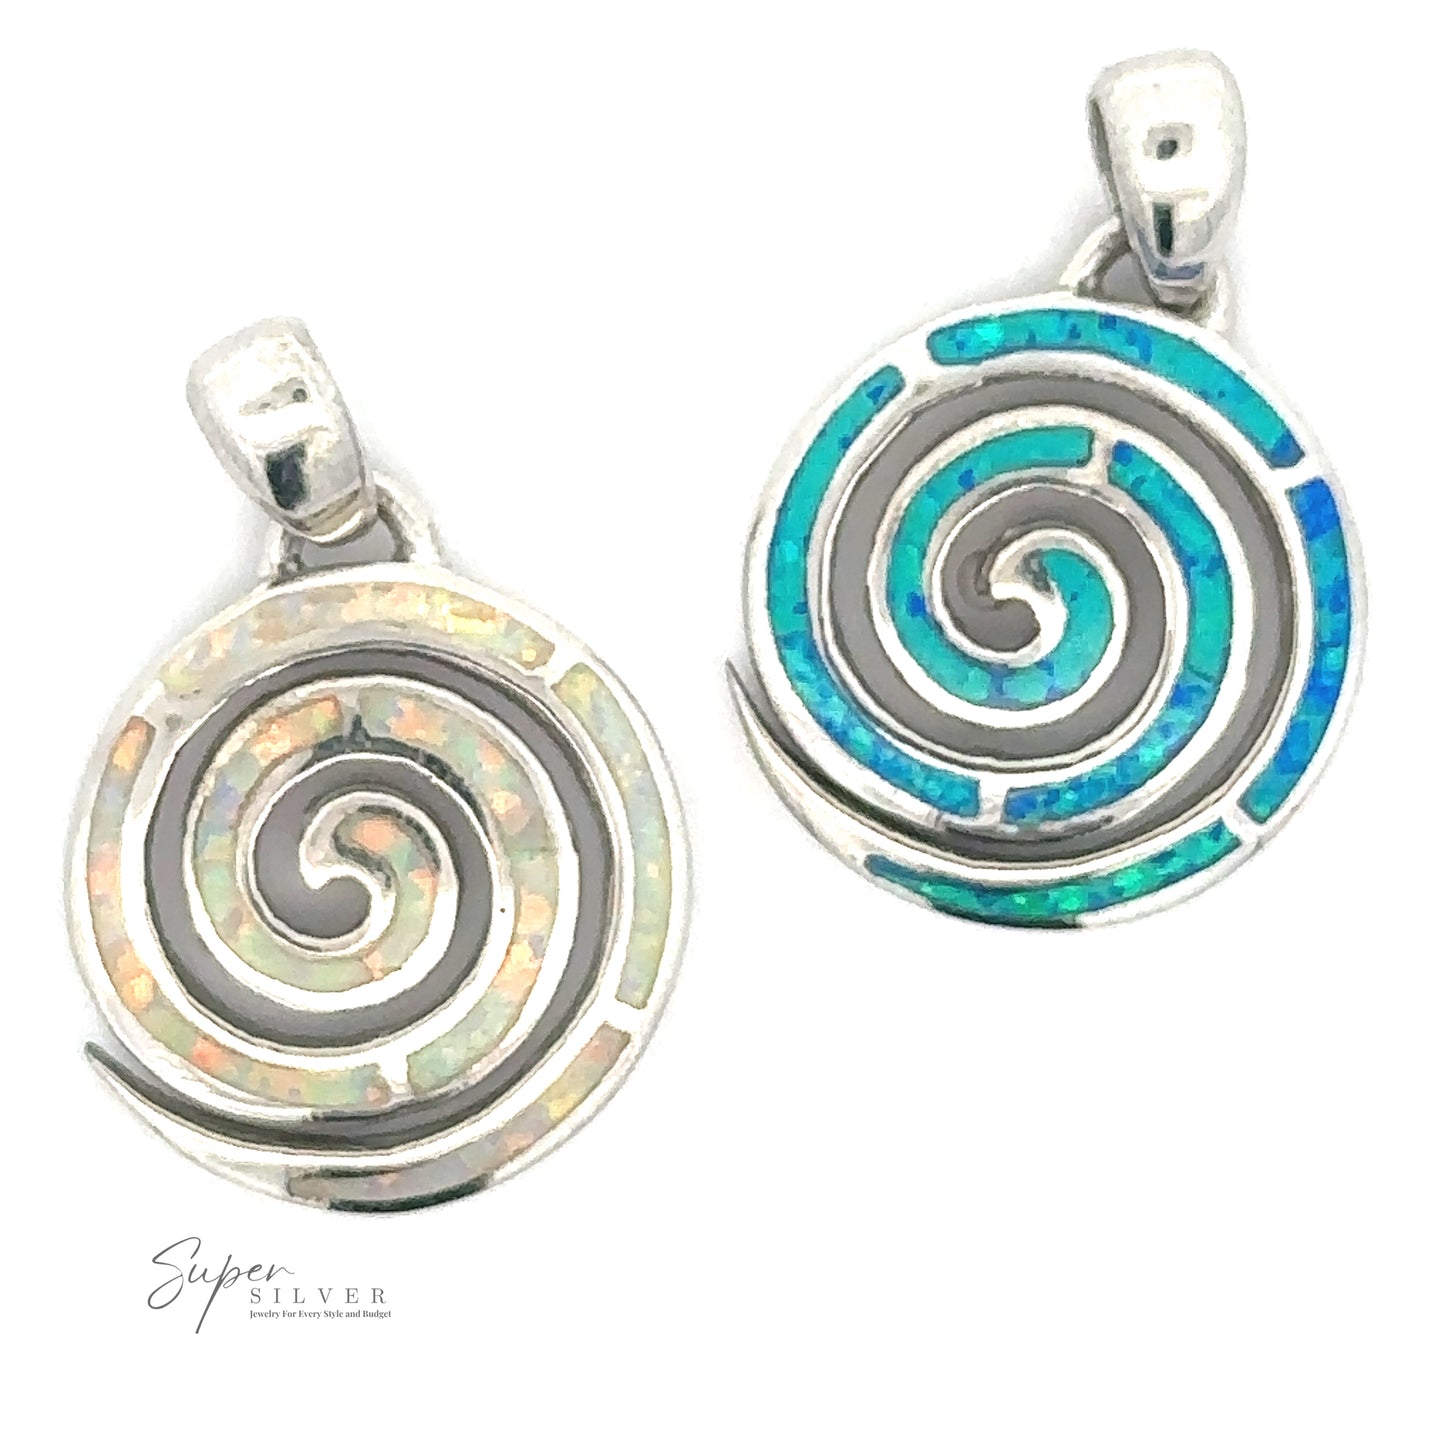 
                  
                    Two Opal Spiral Pendants showcase opal stones. One has iridescent light colors, and the other has blue and green hues. The logo "Super Silver" is visible at the bottom left, both pendants finished in sleek rhodium.
                  
                